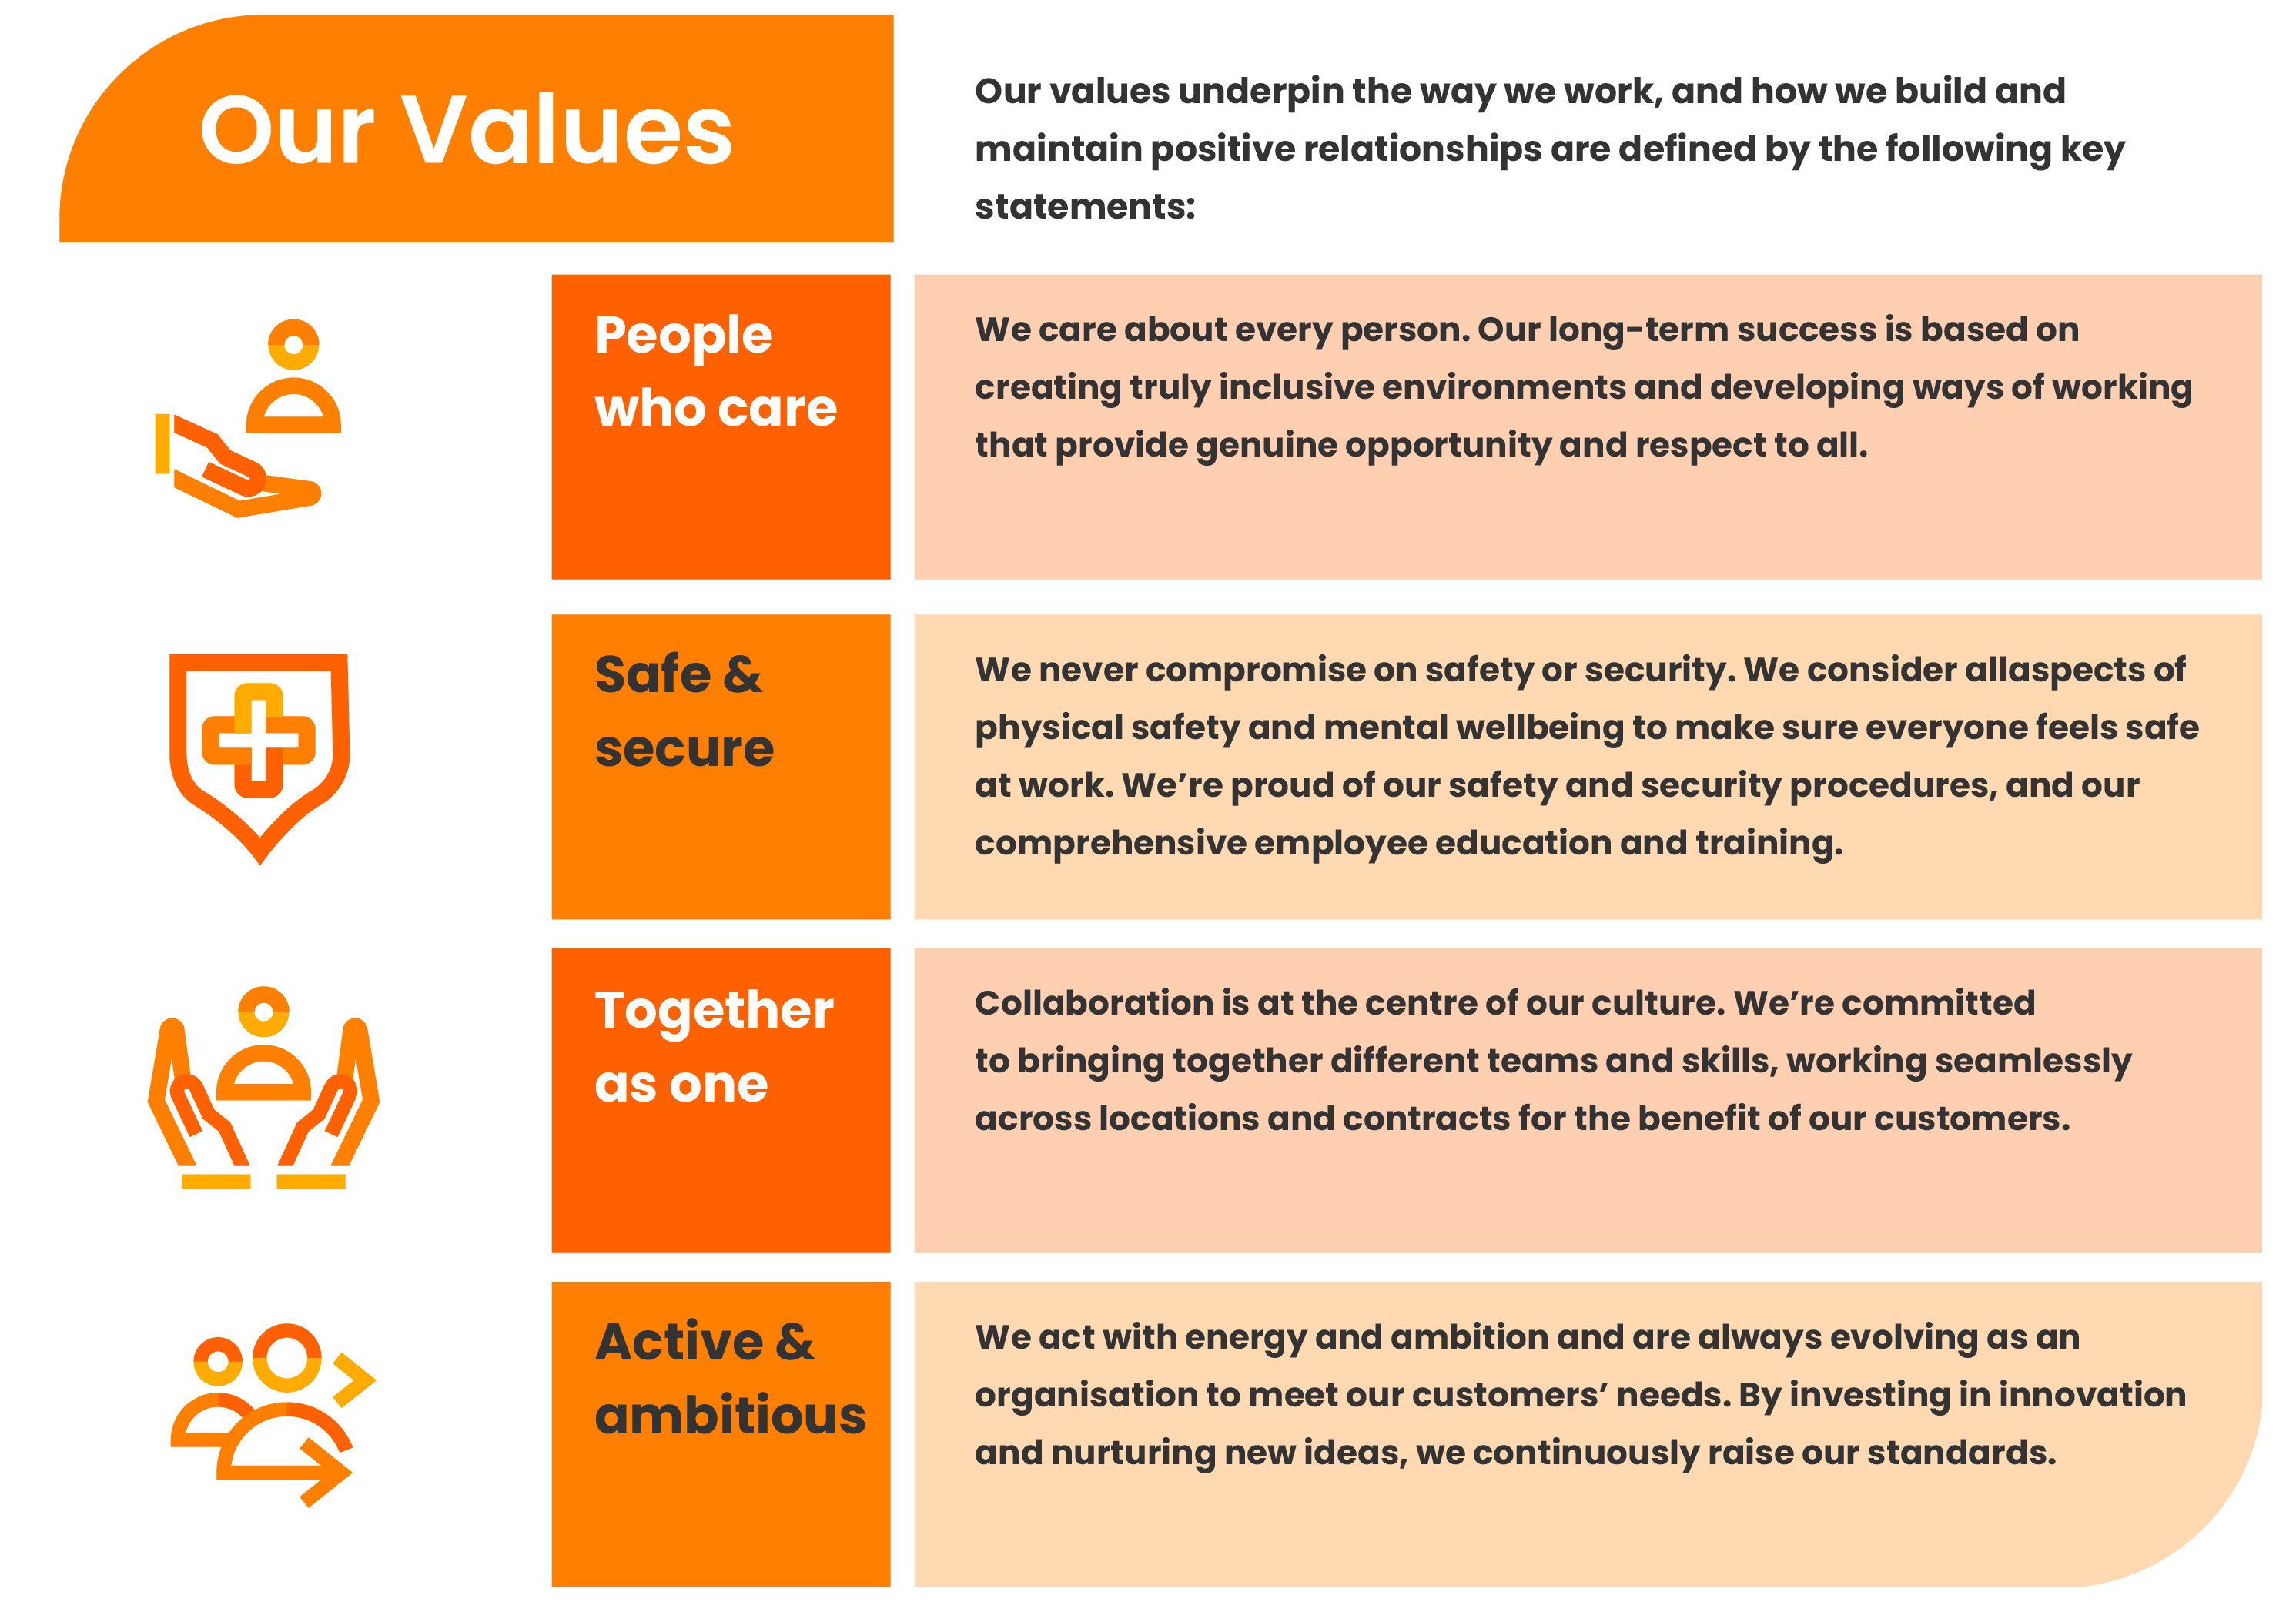 Our Values: People who care, Safe & Secure, Together as one, Active & ambitious